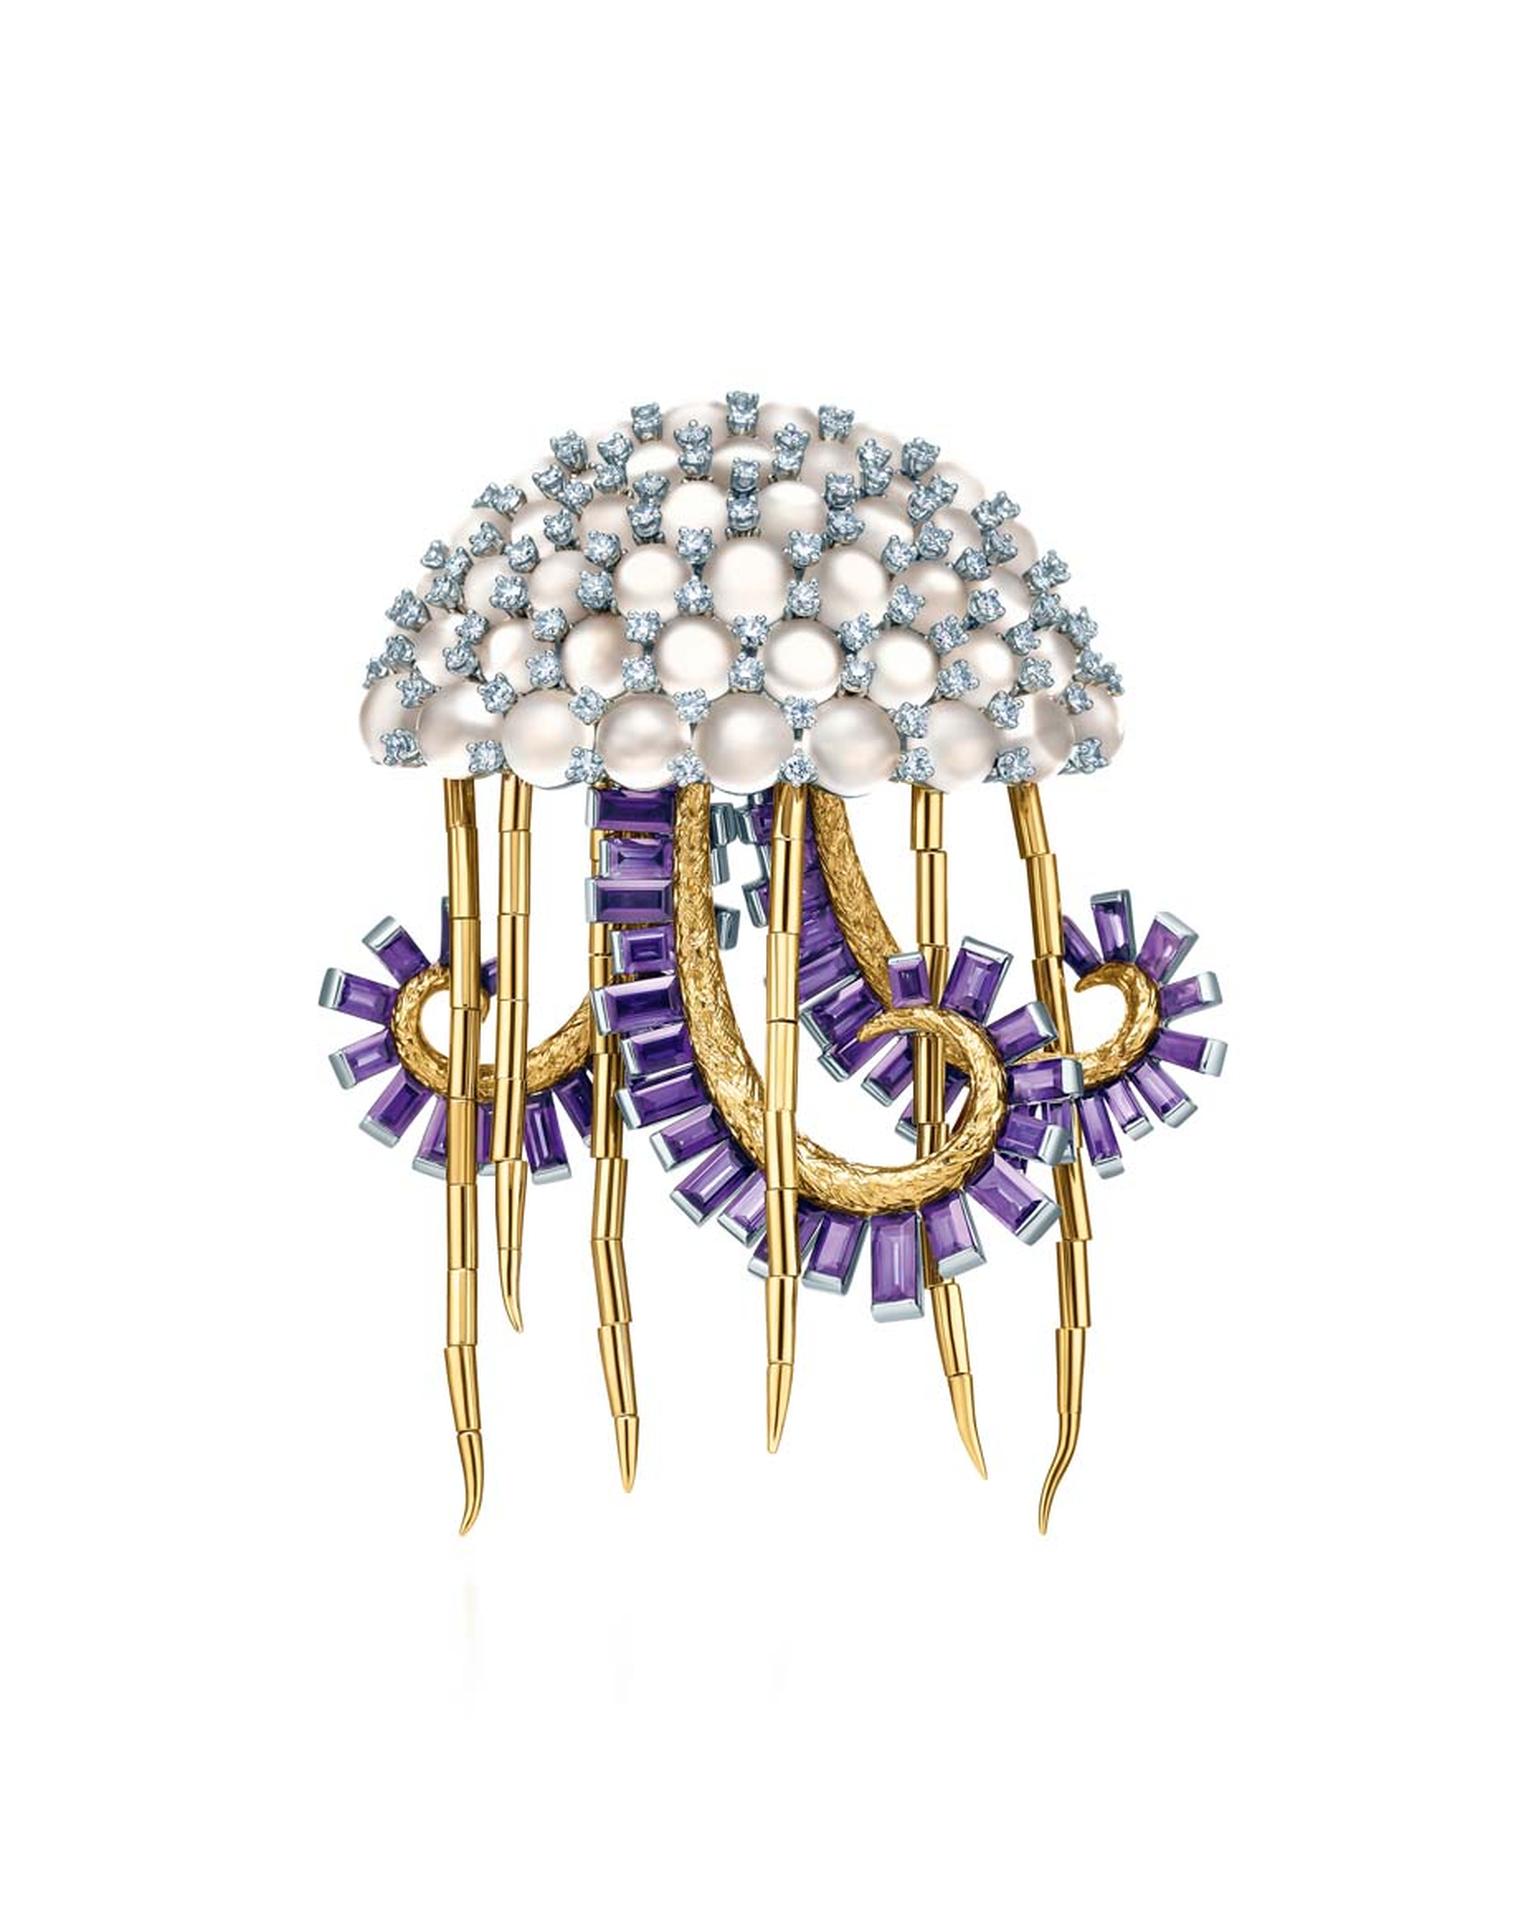 Jean Schlumberger Meduse clip with moonstones, sapphires and diamonds, from the 1998-1999 Tiffany Blue Book collection.